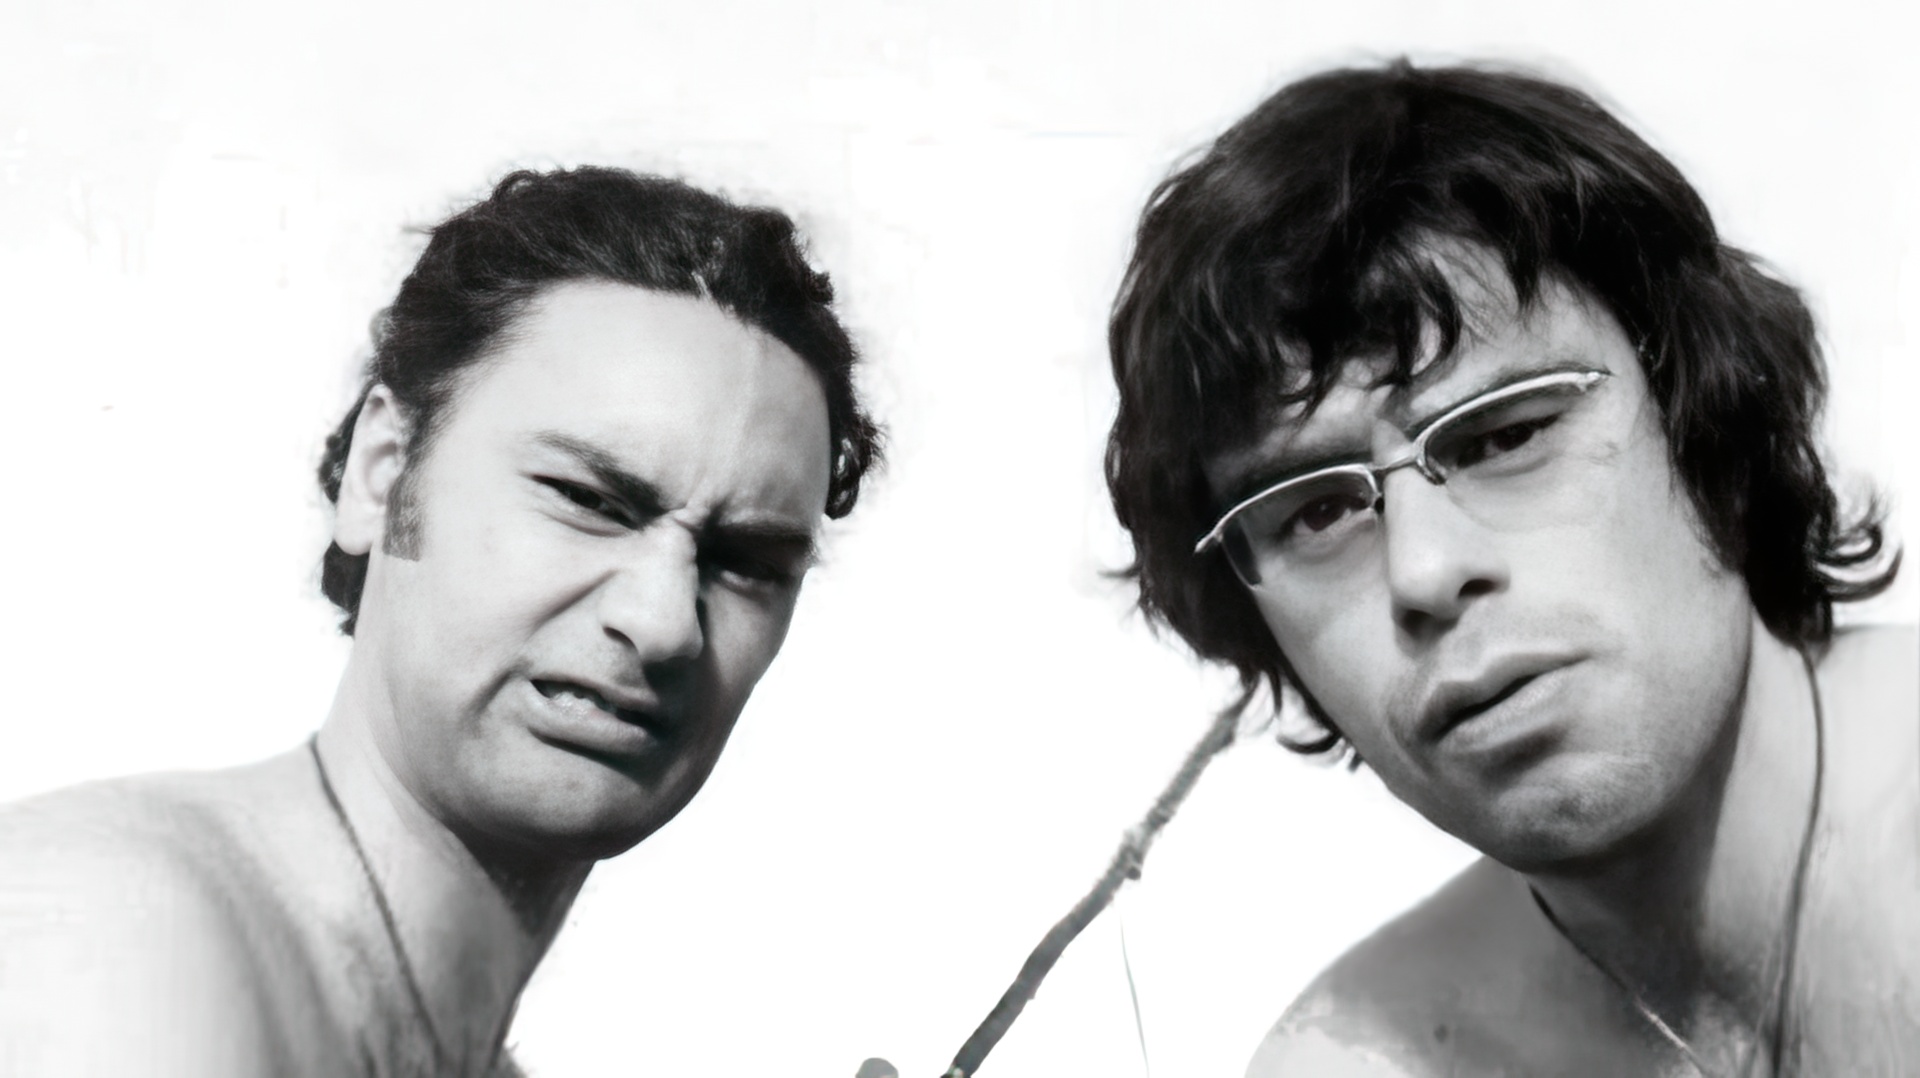 Taika Waititi and Jemaine Clement in their youth